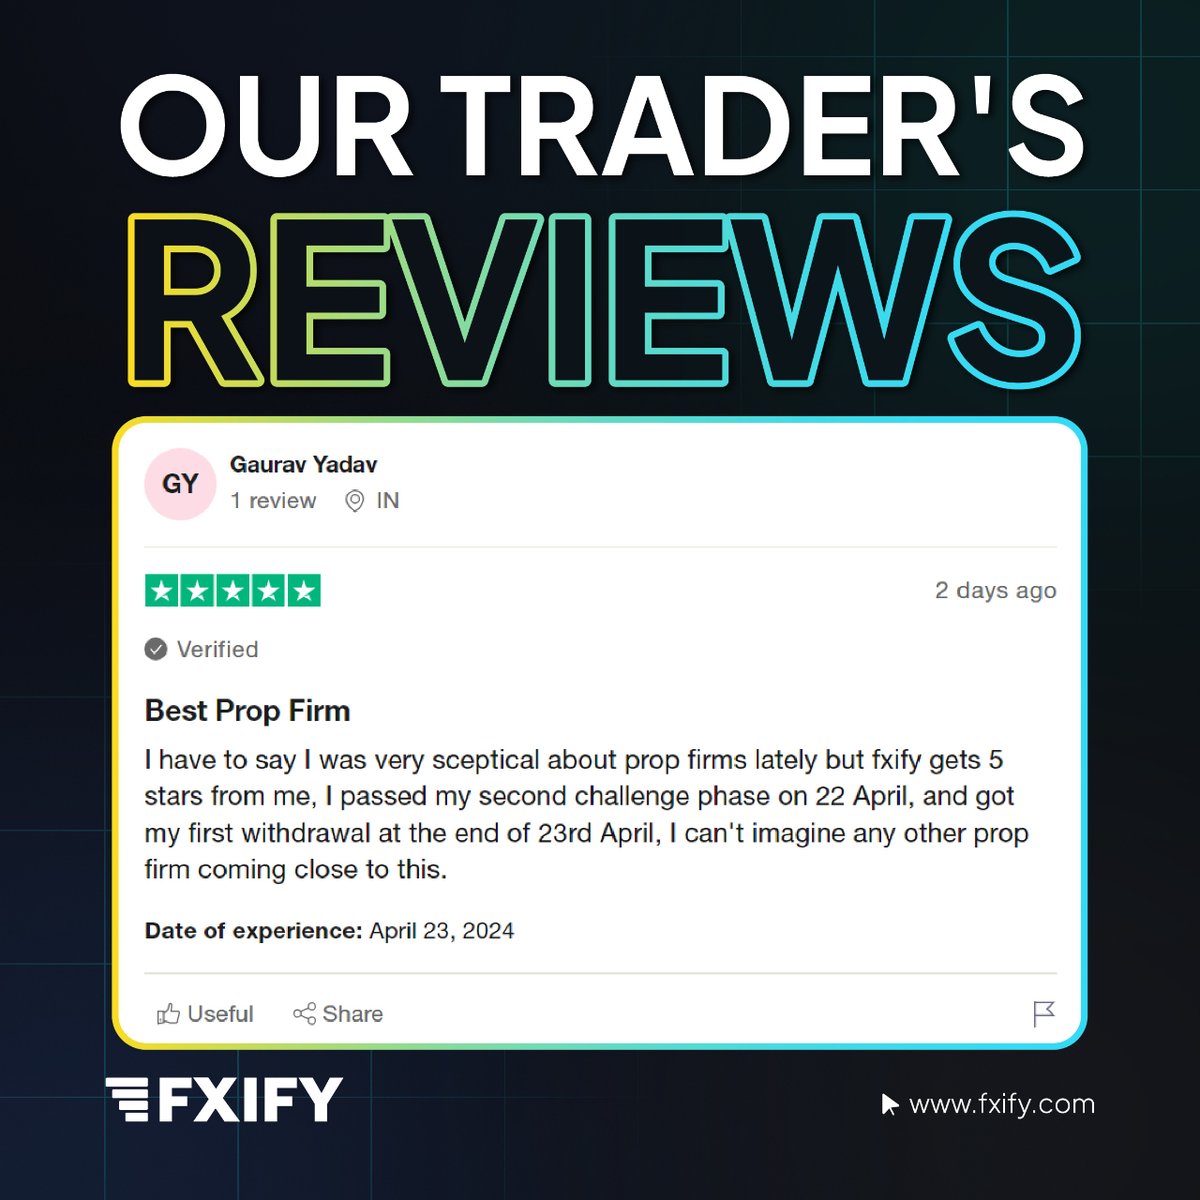 Thinking about trying a prop firm? Check out this fantastic review from Gaurav Yadav on Trustpilot! He shares his experience with passing the challenge phase and getting his first withdrawal quickly. FXIFY is the best💪!

#FXIFY #PropReview